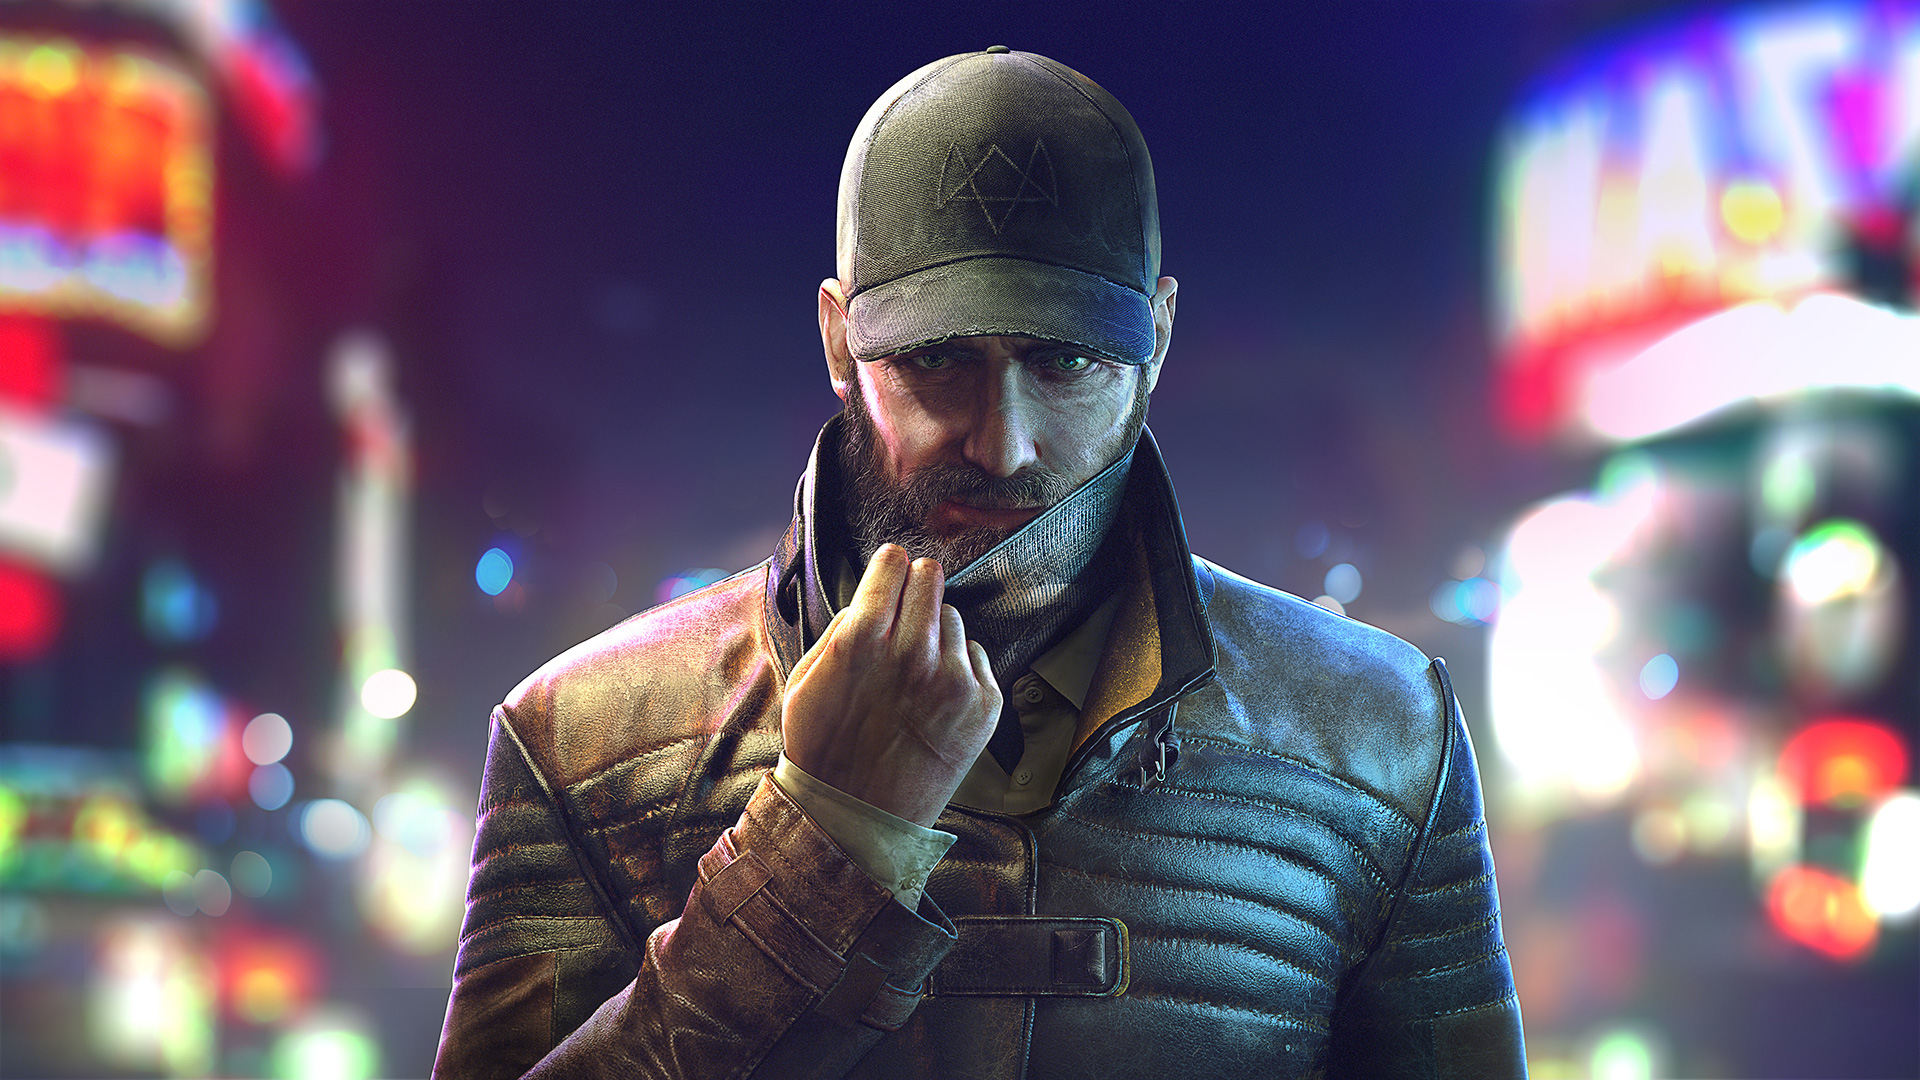 watch dogs: legion characters